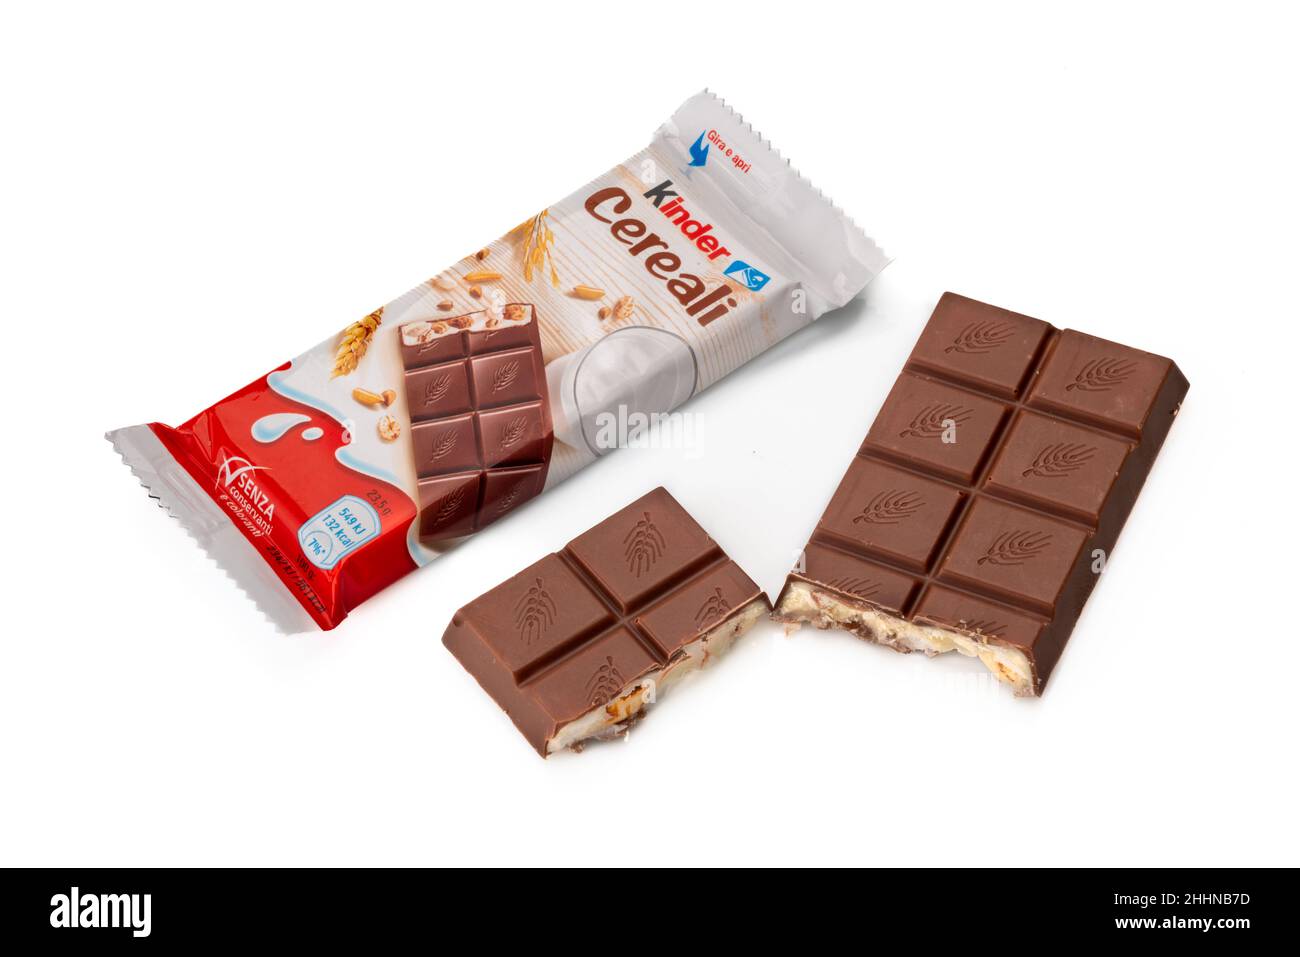 Alba, Italy - December 28, 2021: package of Kinder Cereali Ferrero with bar of milk chocolate stuffed with milk and puffed cereals isolated on white p Stock Photo